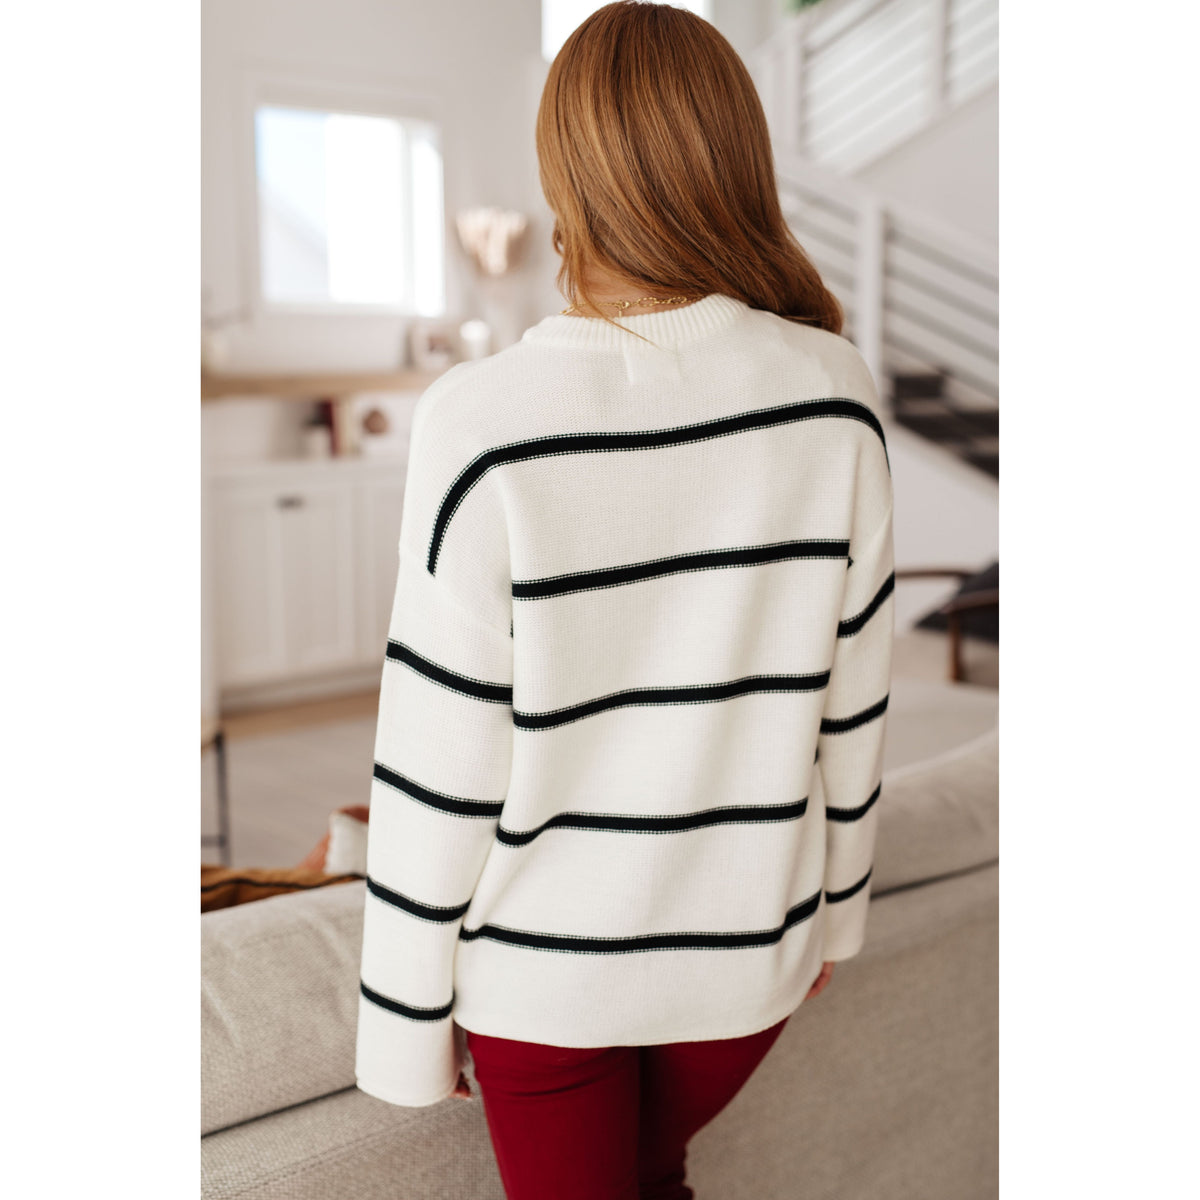 Women's More or Less Striped Sweater